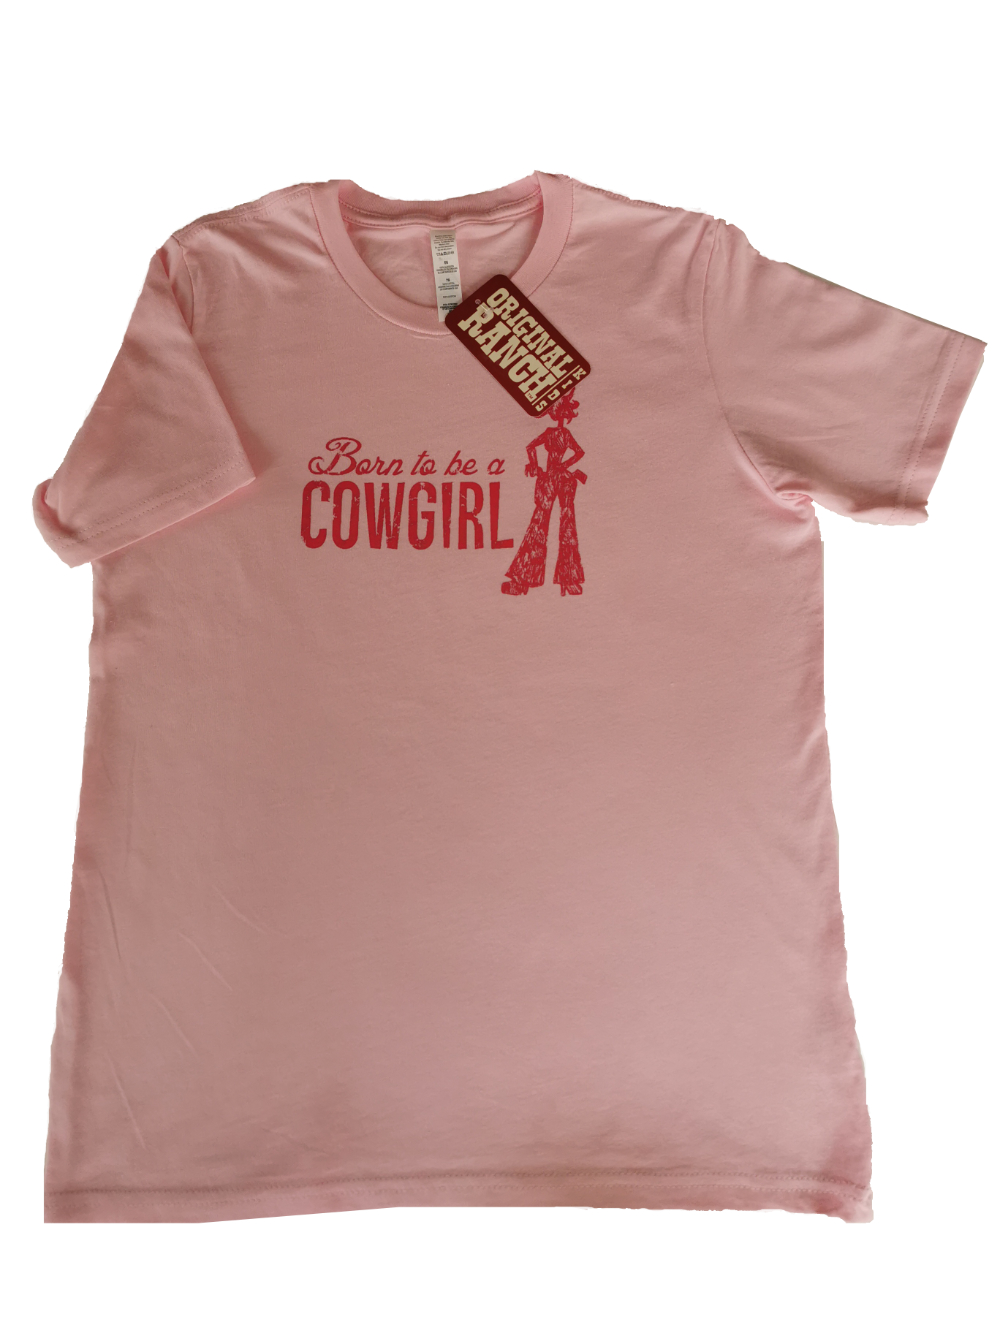 Mädchen-T-Shirt "Born to be a Cowgirl" Pink